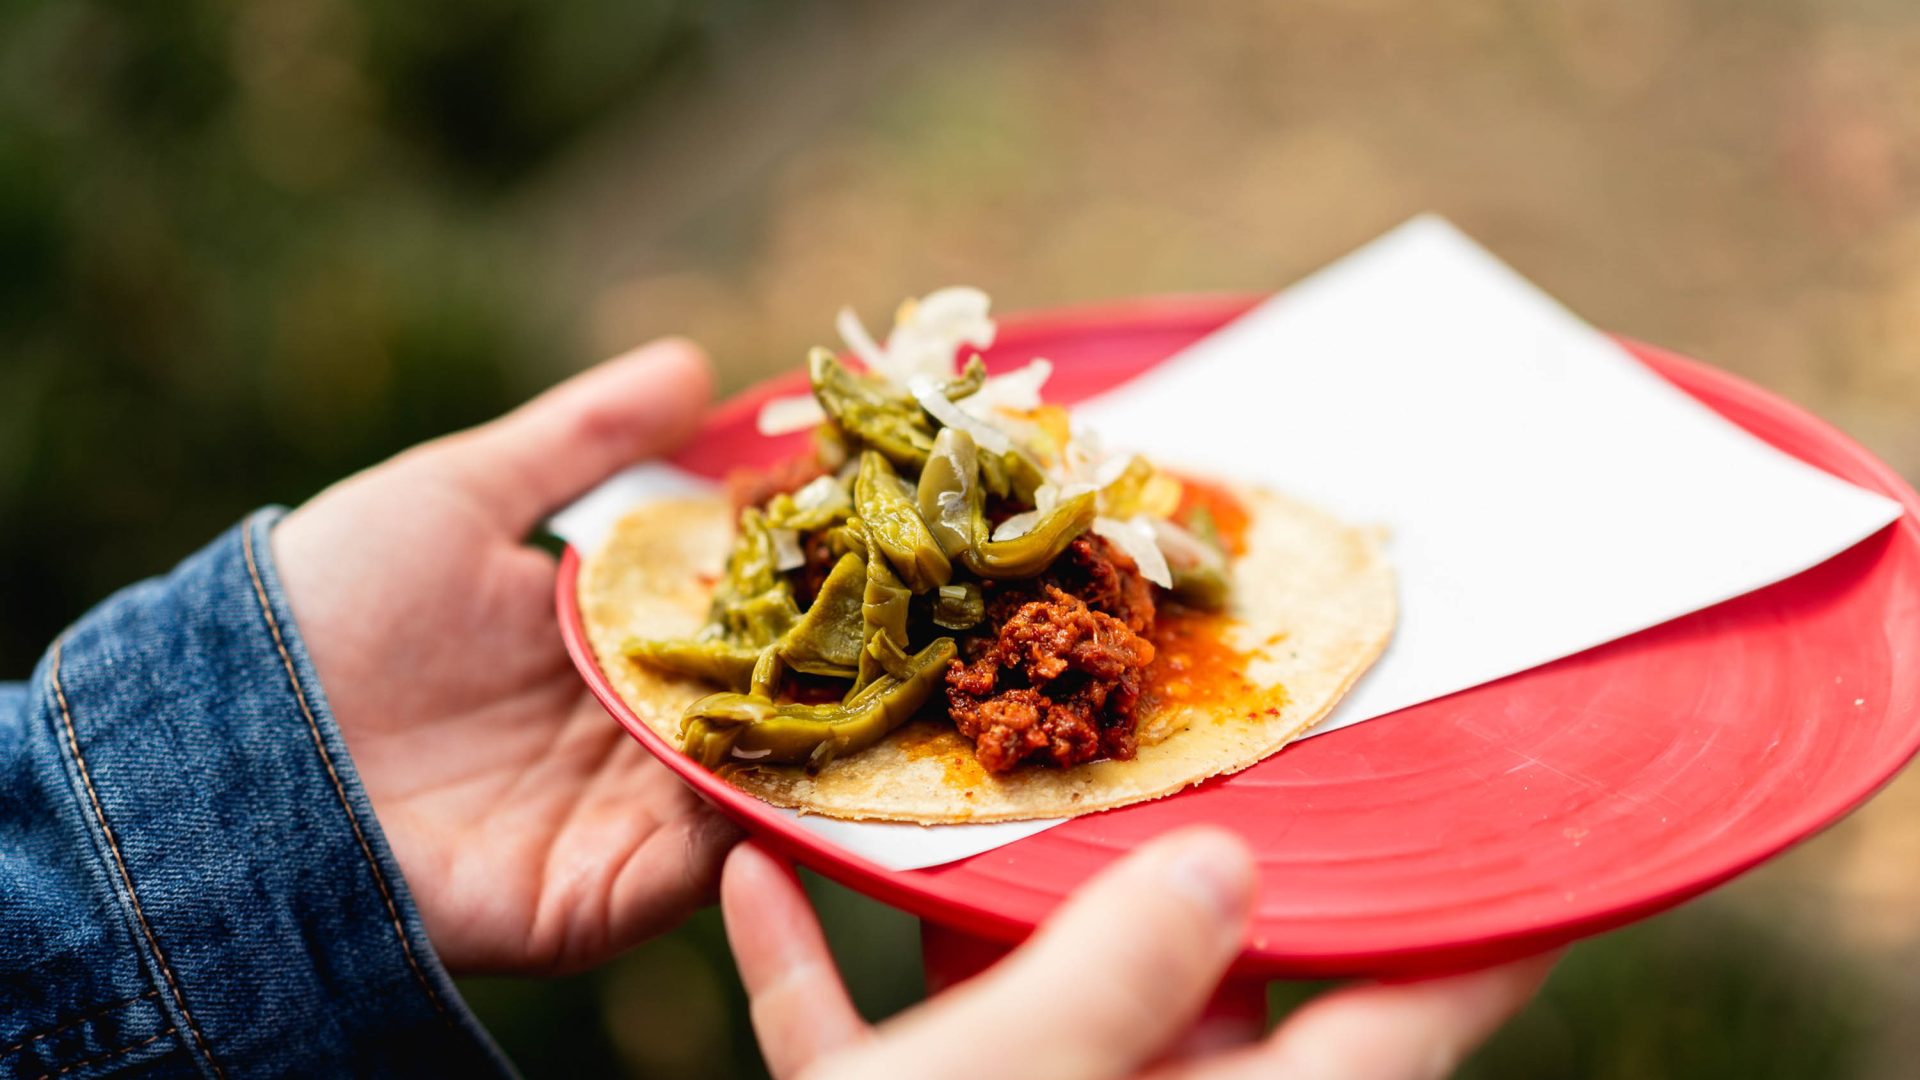 A hand holds a red plate with a Mixiote taco.